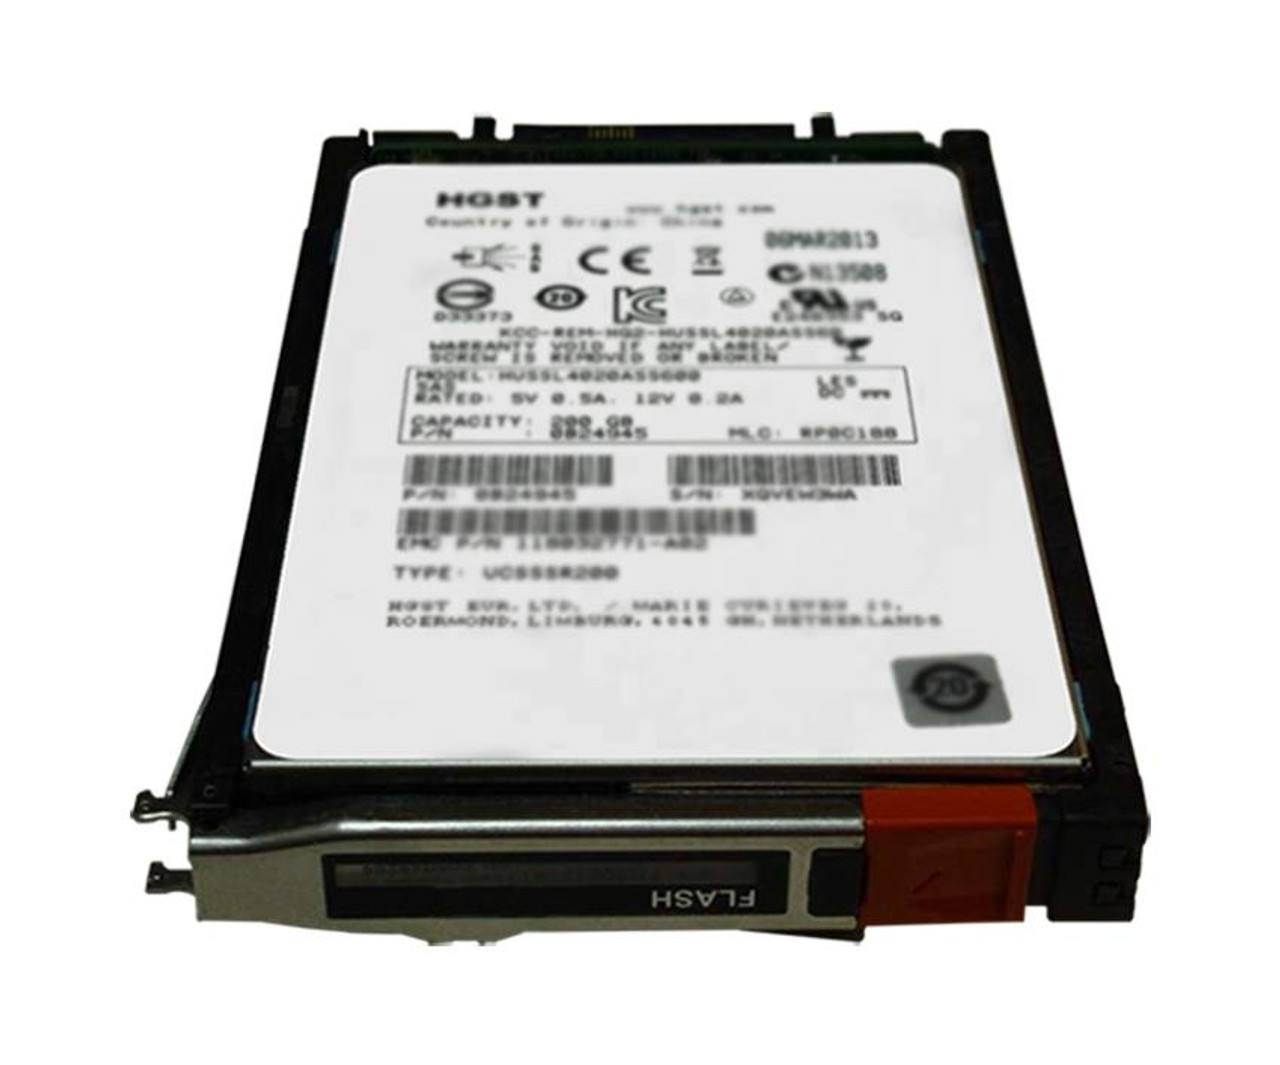 005052398 EMC 1600GB SAS 6Gbps EFD 2.5-inch Internal Solid State Drive (SSD) with Tray for VNX5200 5400 5600 5800 7600 8000 Storage Systems